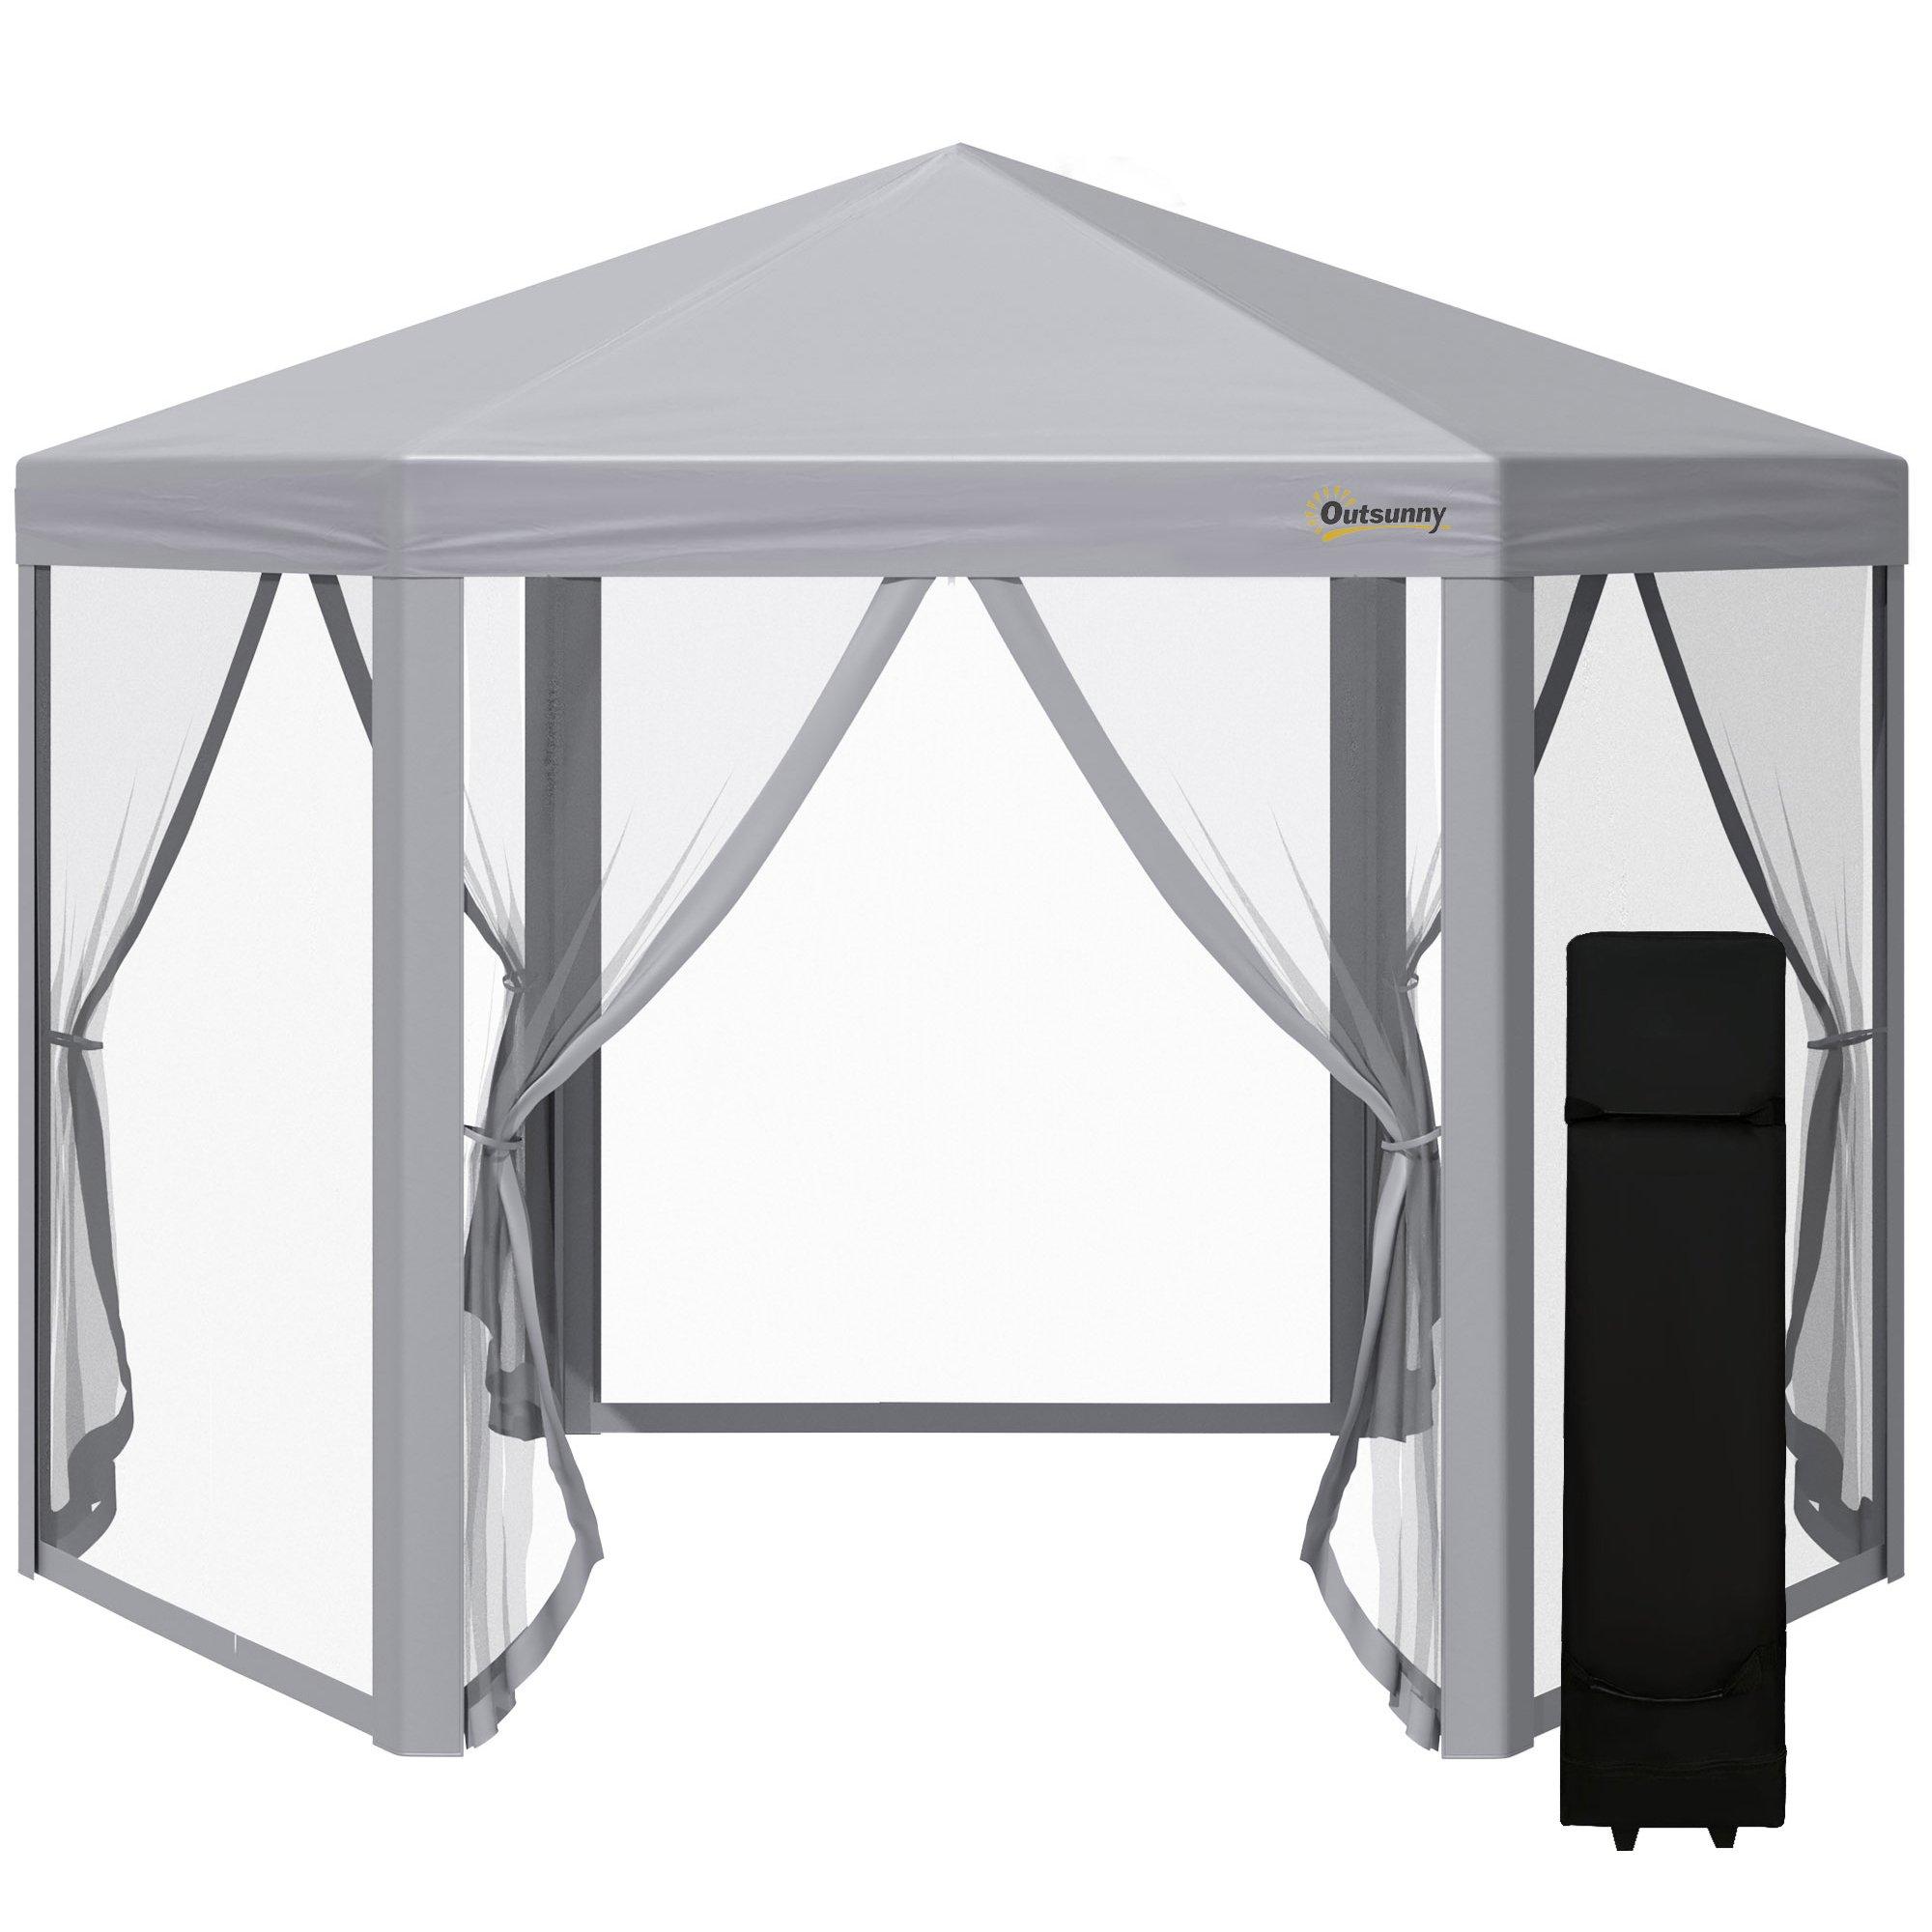 3 x 3Metre Pop Up Gazebo Foldable Canopy Tent with Roller Bag